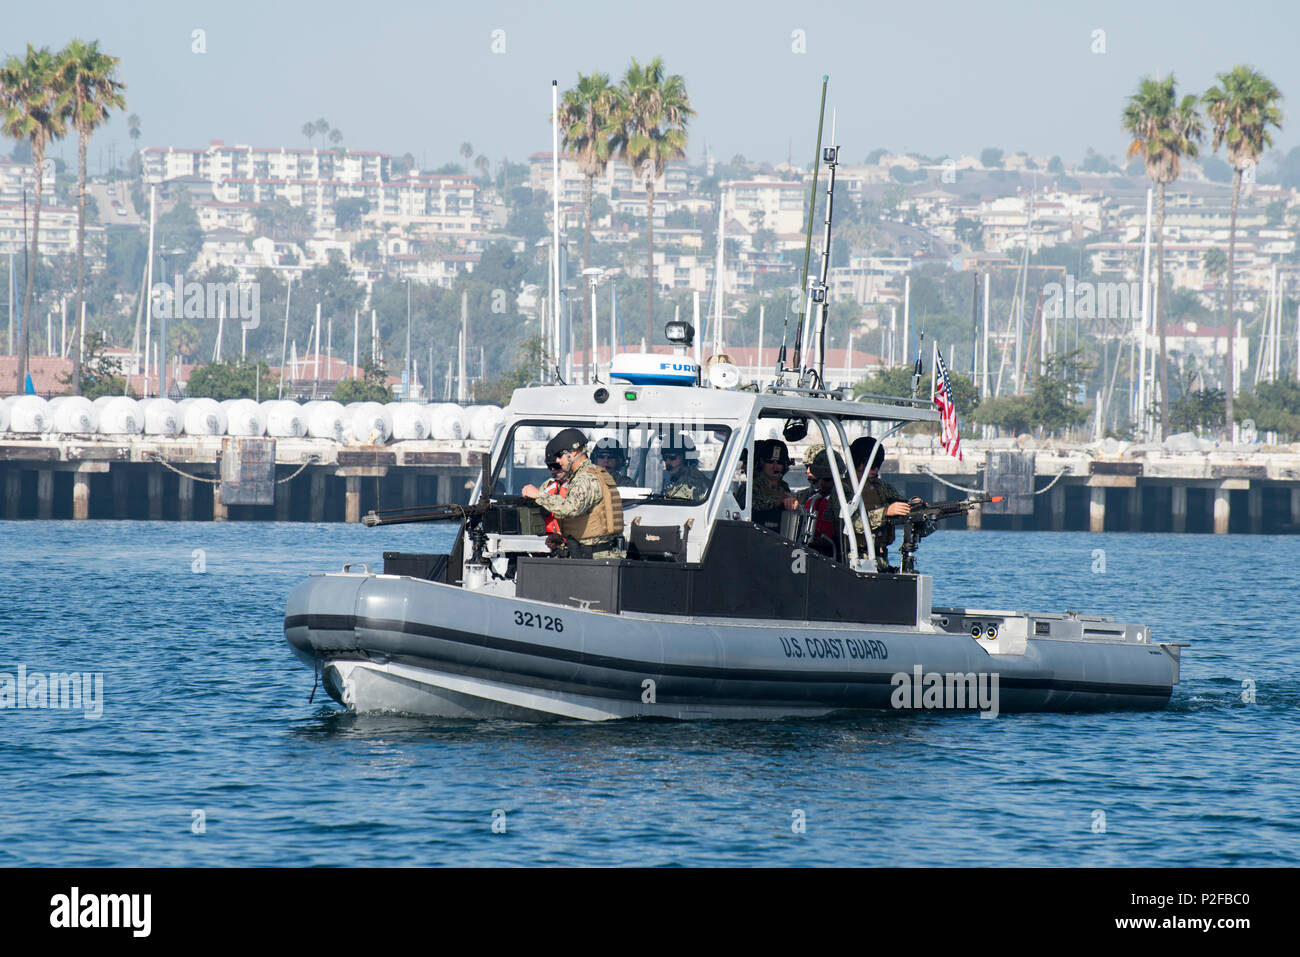 https://c8.alamy.com/comp/P2FBC0/san-pedro-california-members-of-coast-guard-port-security-unit-311-based-in-san-pedro-conducted-a-military-training-exercise-in-the-port-of-los-angeles-on-september-17-2016-the-training-exercise-is-designed-to-test-and-maintain-the-proficiency-of-the-units-reserve-and-active-duty-members-during-the-drill-members-were-required-to-conduct-high-speed-small-boat-maneuvers-and-simulated-automatic-weapon-fire-us-coast-guard-photo-by-petty-officer-3rd-class-andrea-anderson-P2FBC0.jpg